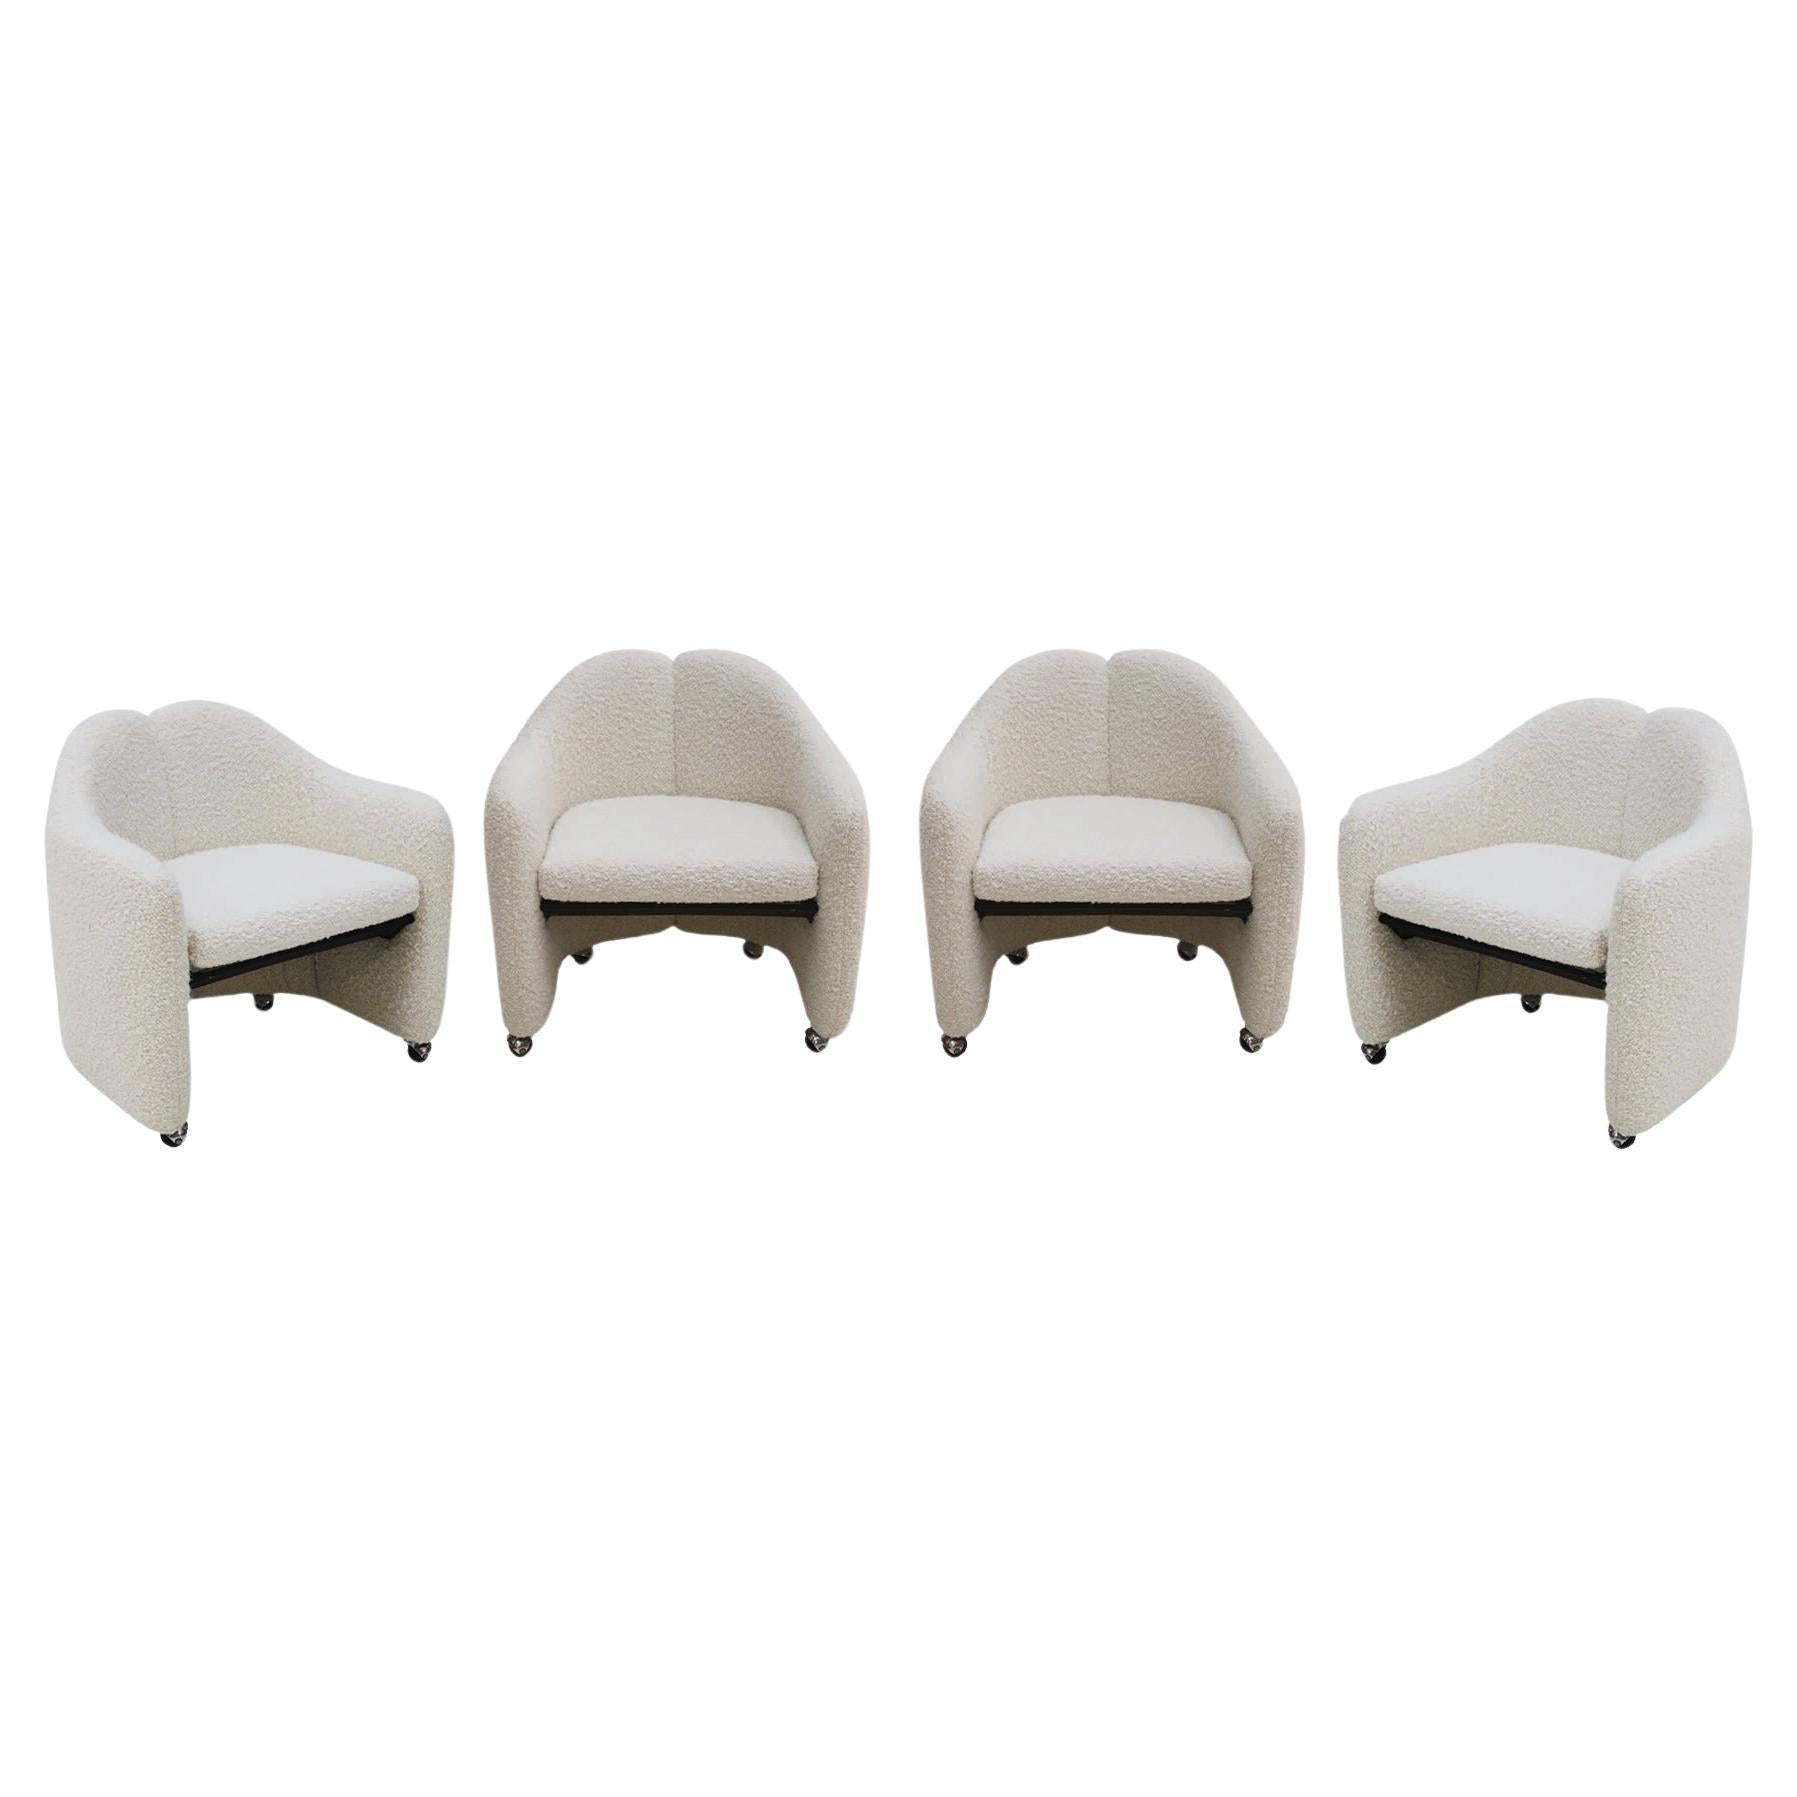 Set of Four PS142 Chairs Designed By Eugenio Gerli, Italy 1960's For Sale